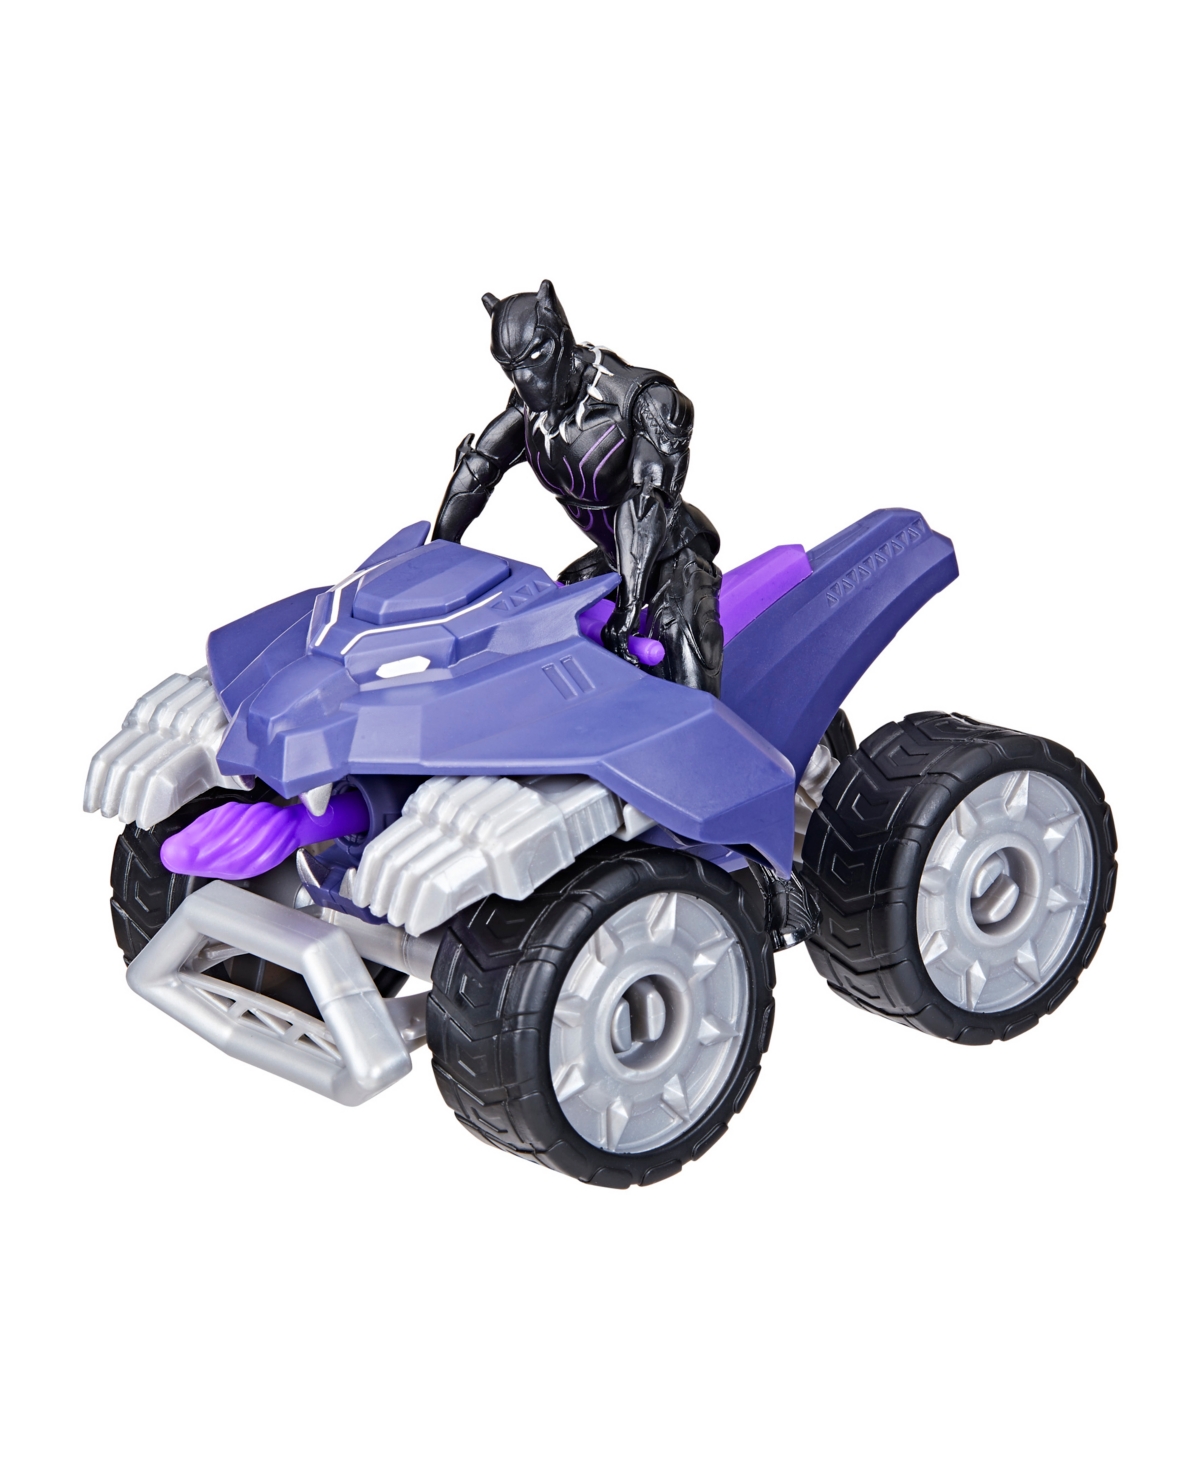 Shop Marvel Avengers Black Panther Claw Strike Atv With Figurine In No Color